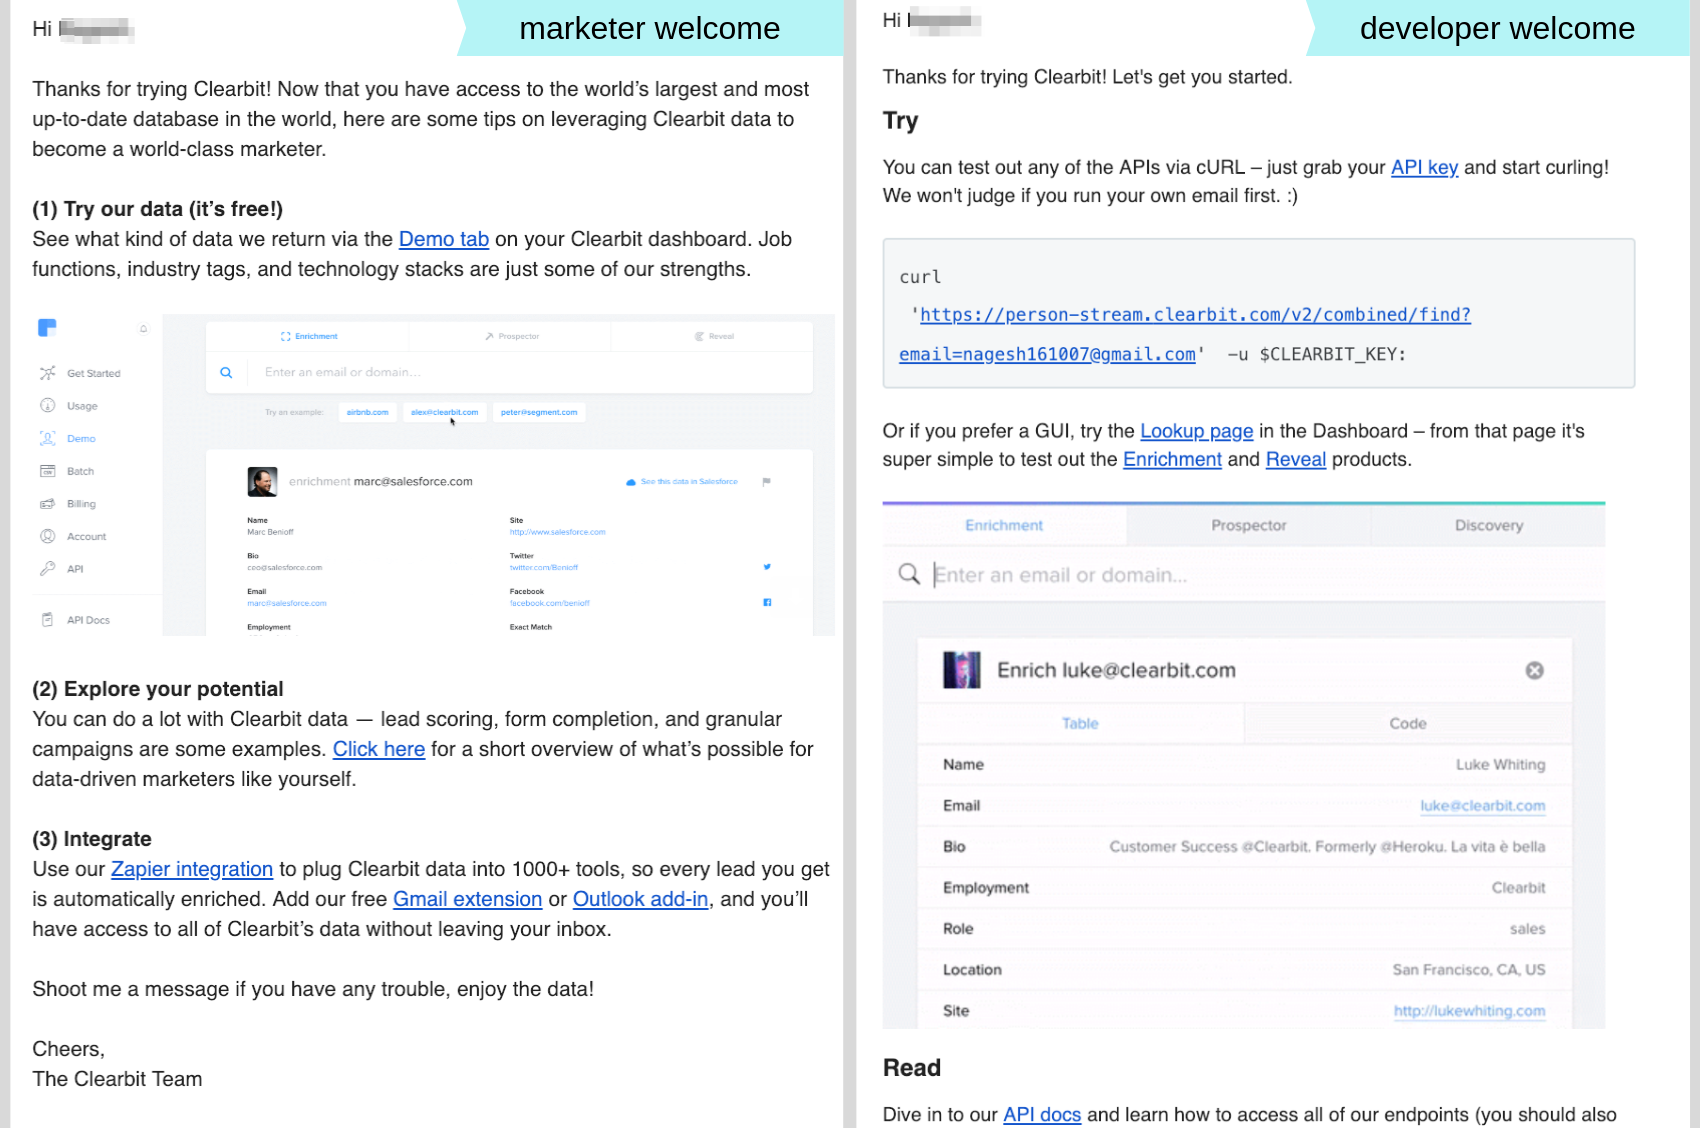 role-based welcome email comparison